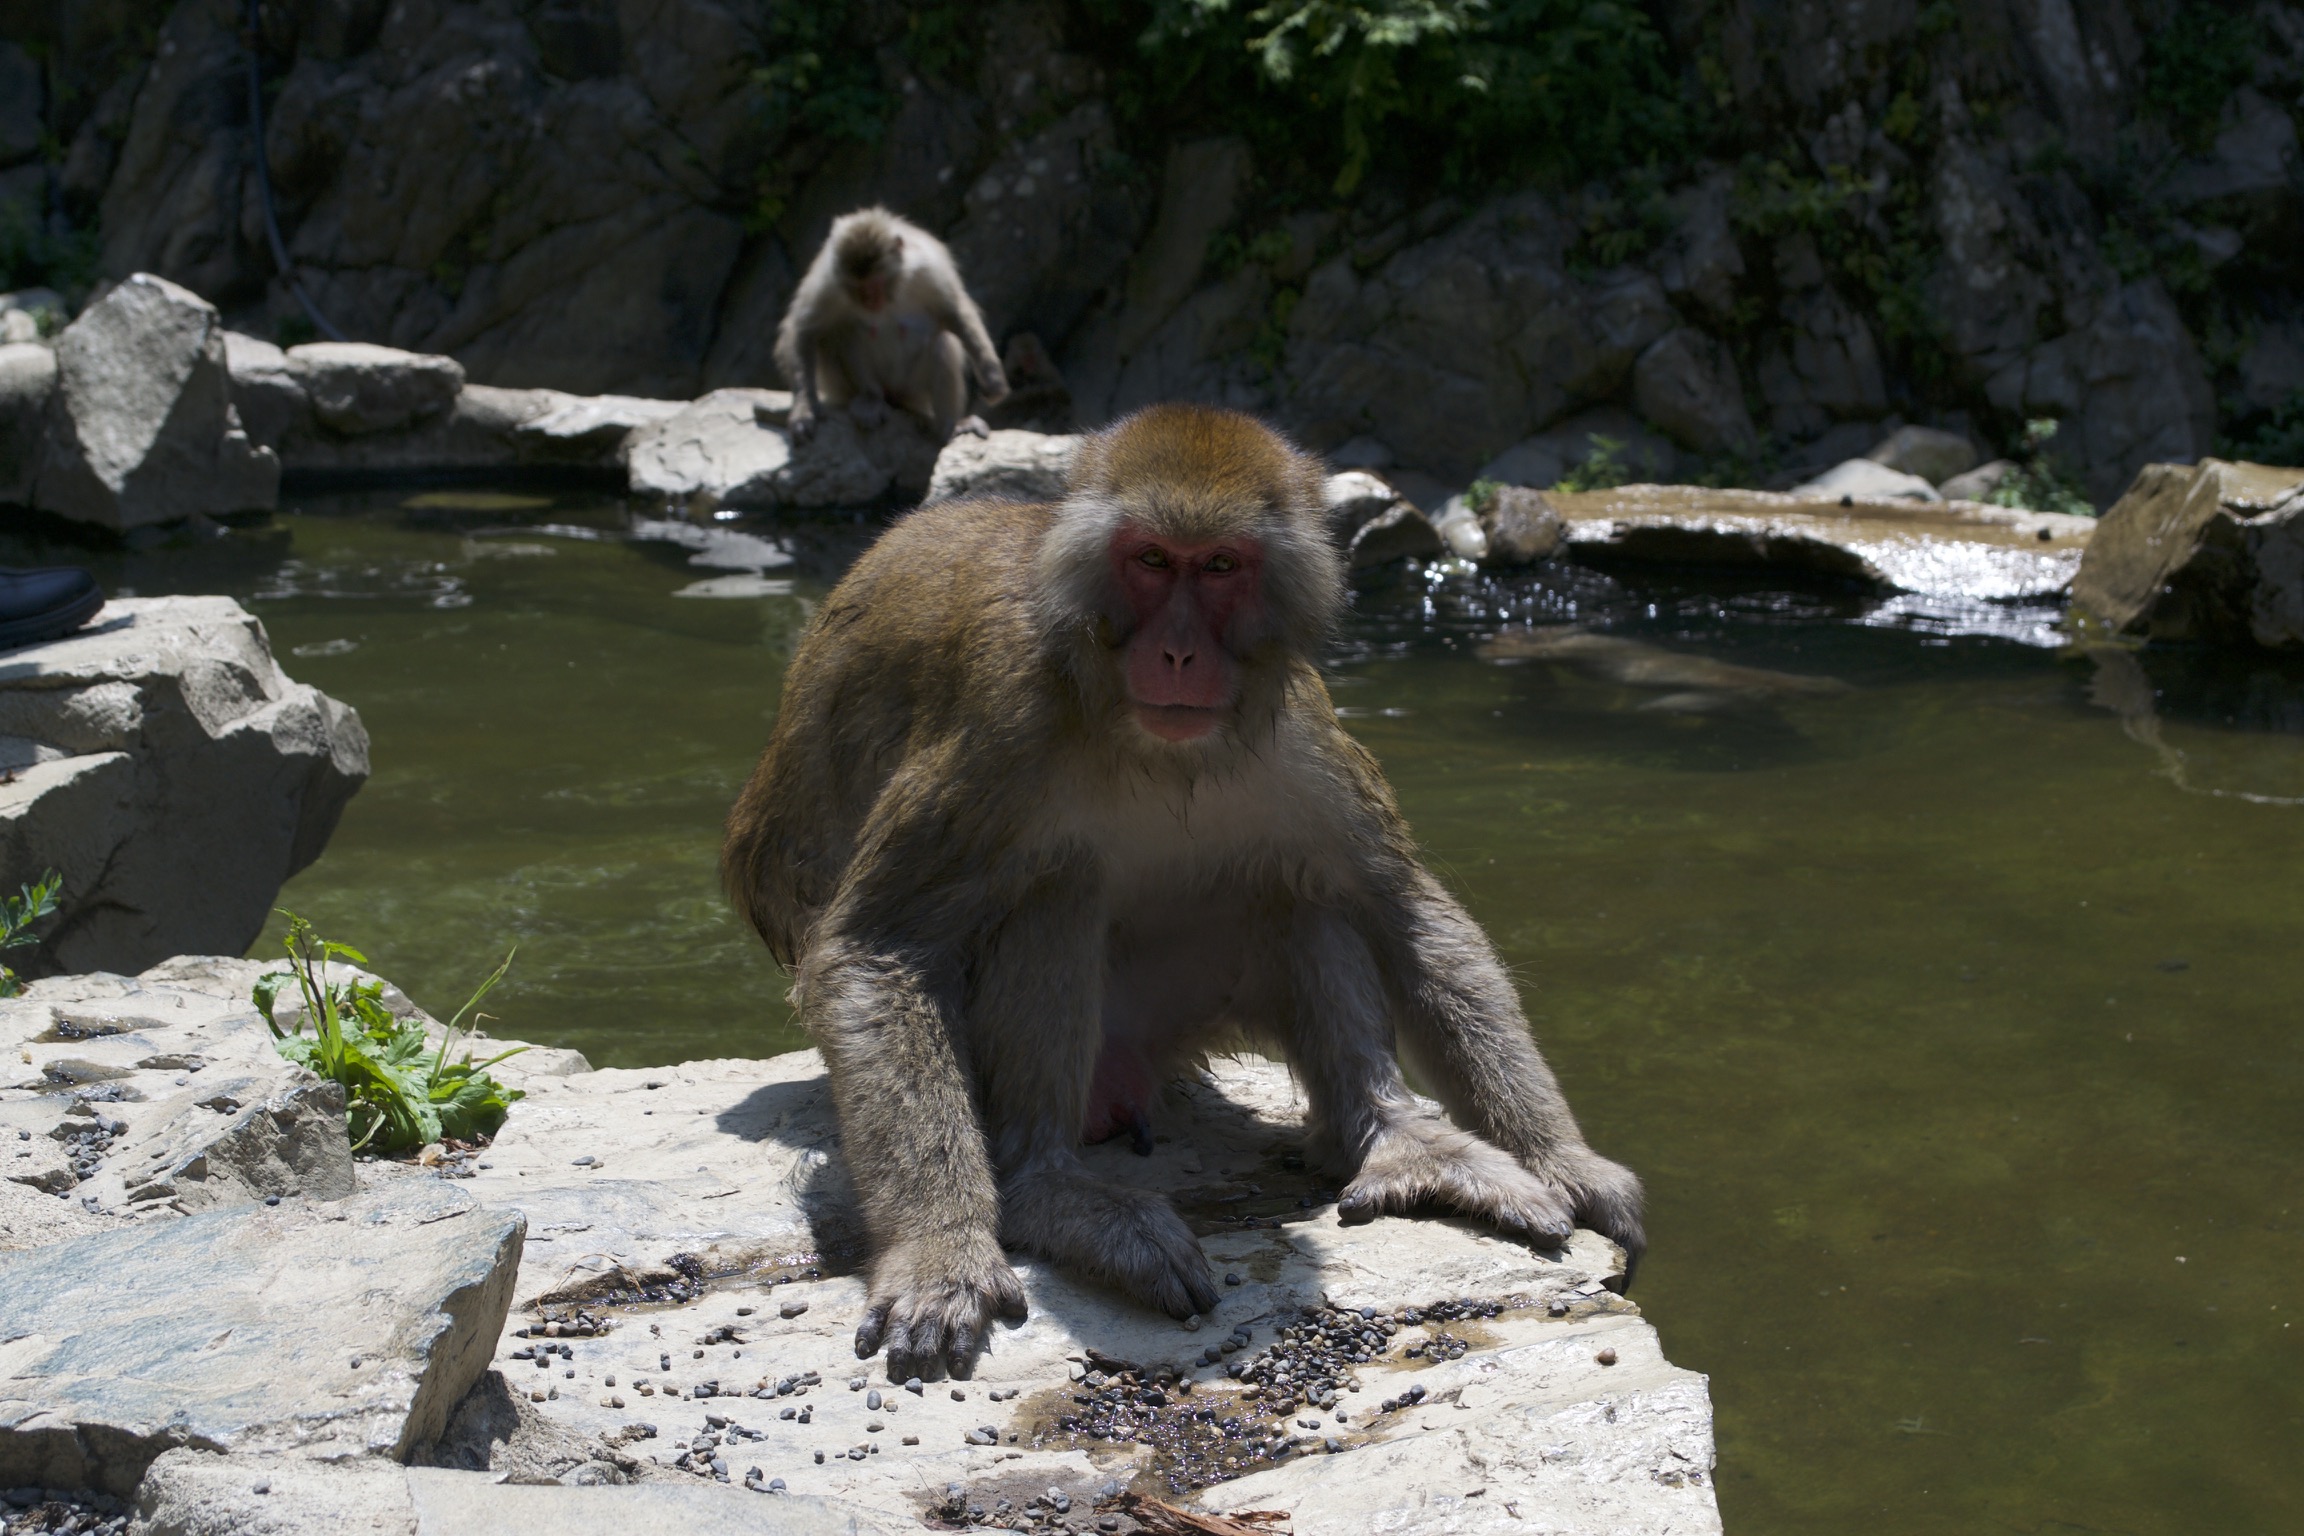 A snow monkey sits, drying.